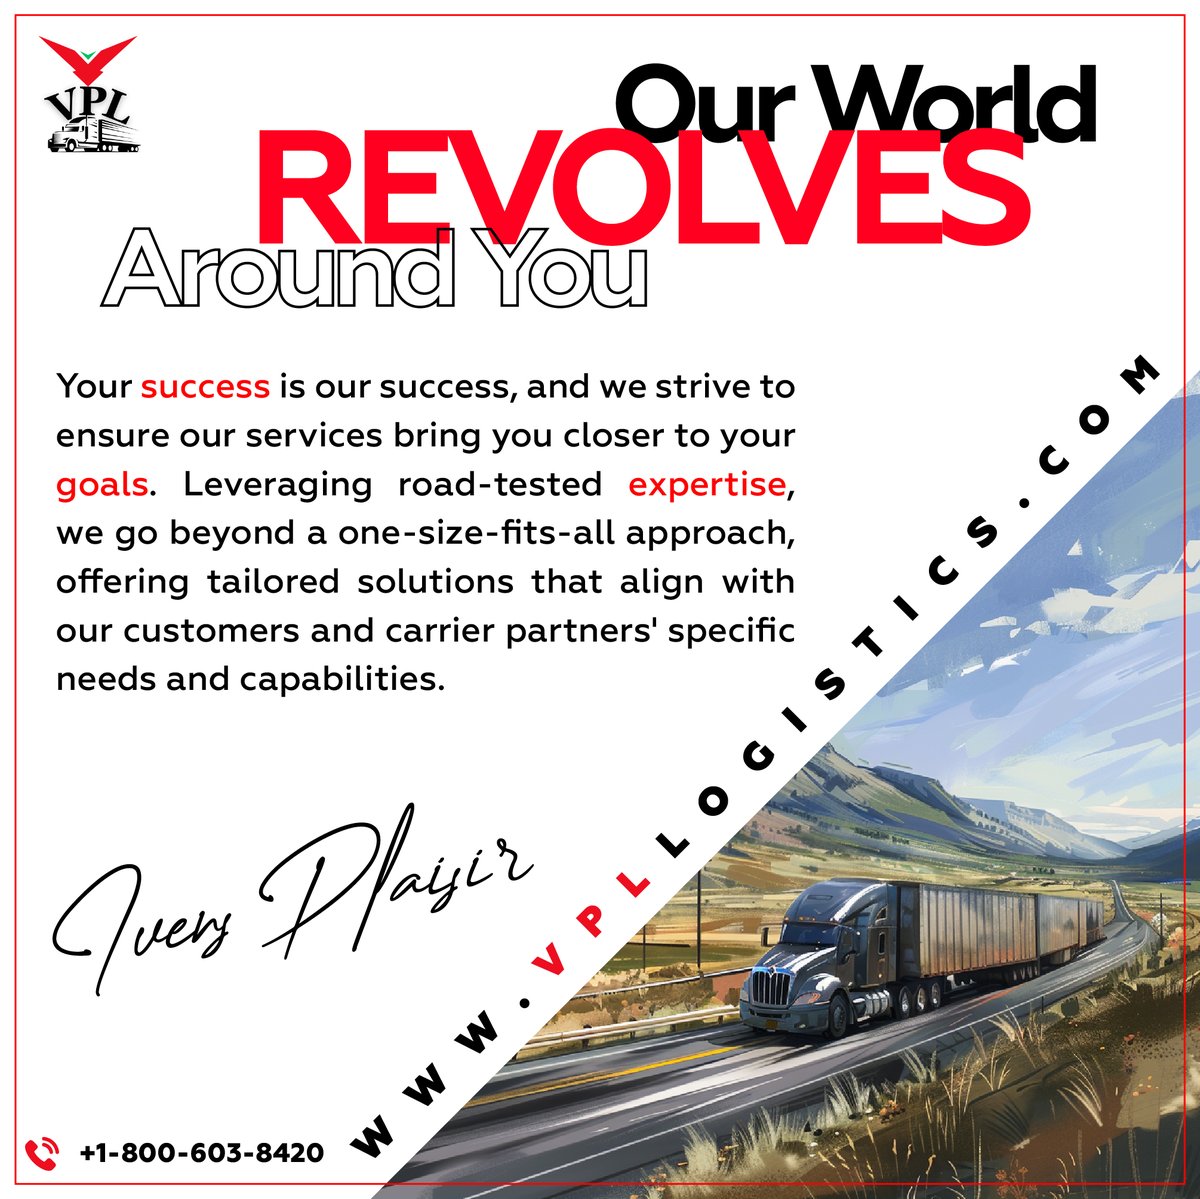 Our World Revolves Around You

Your success is our success, and we strive to ensure our services bring you closer to your goals.

#LastMileDelivery #truckingindustry #vensplailogistics